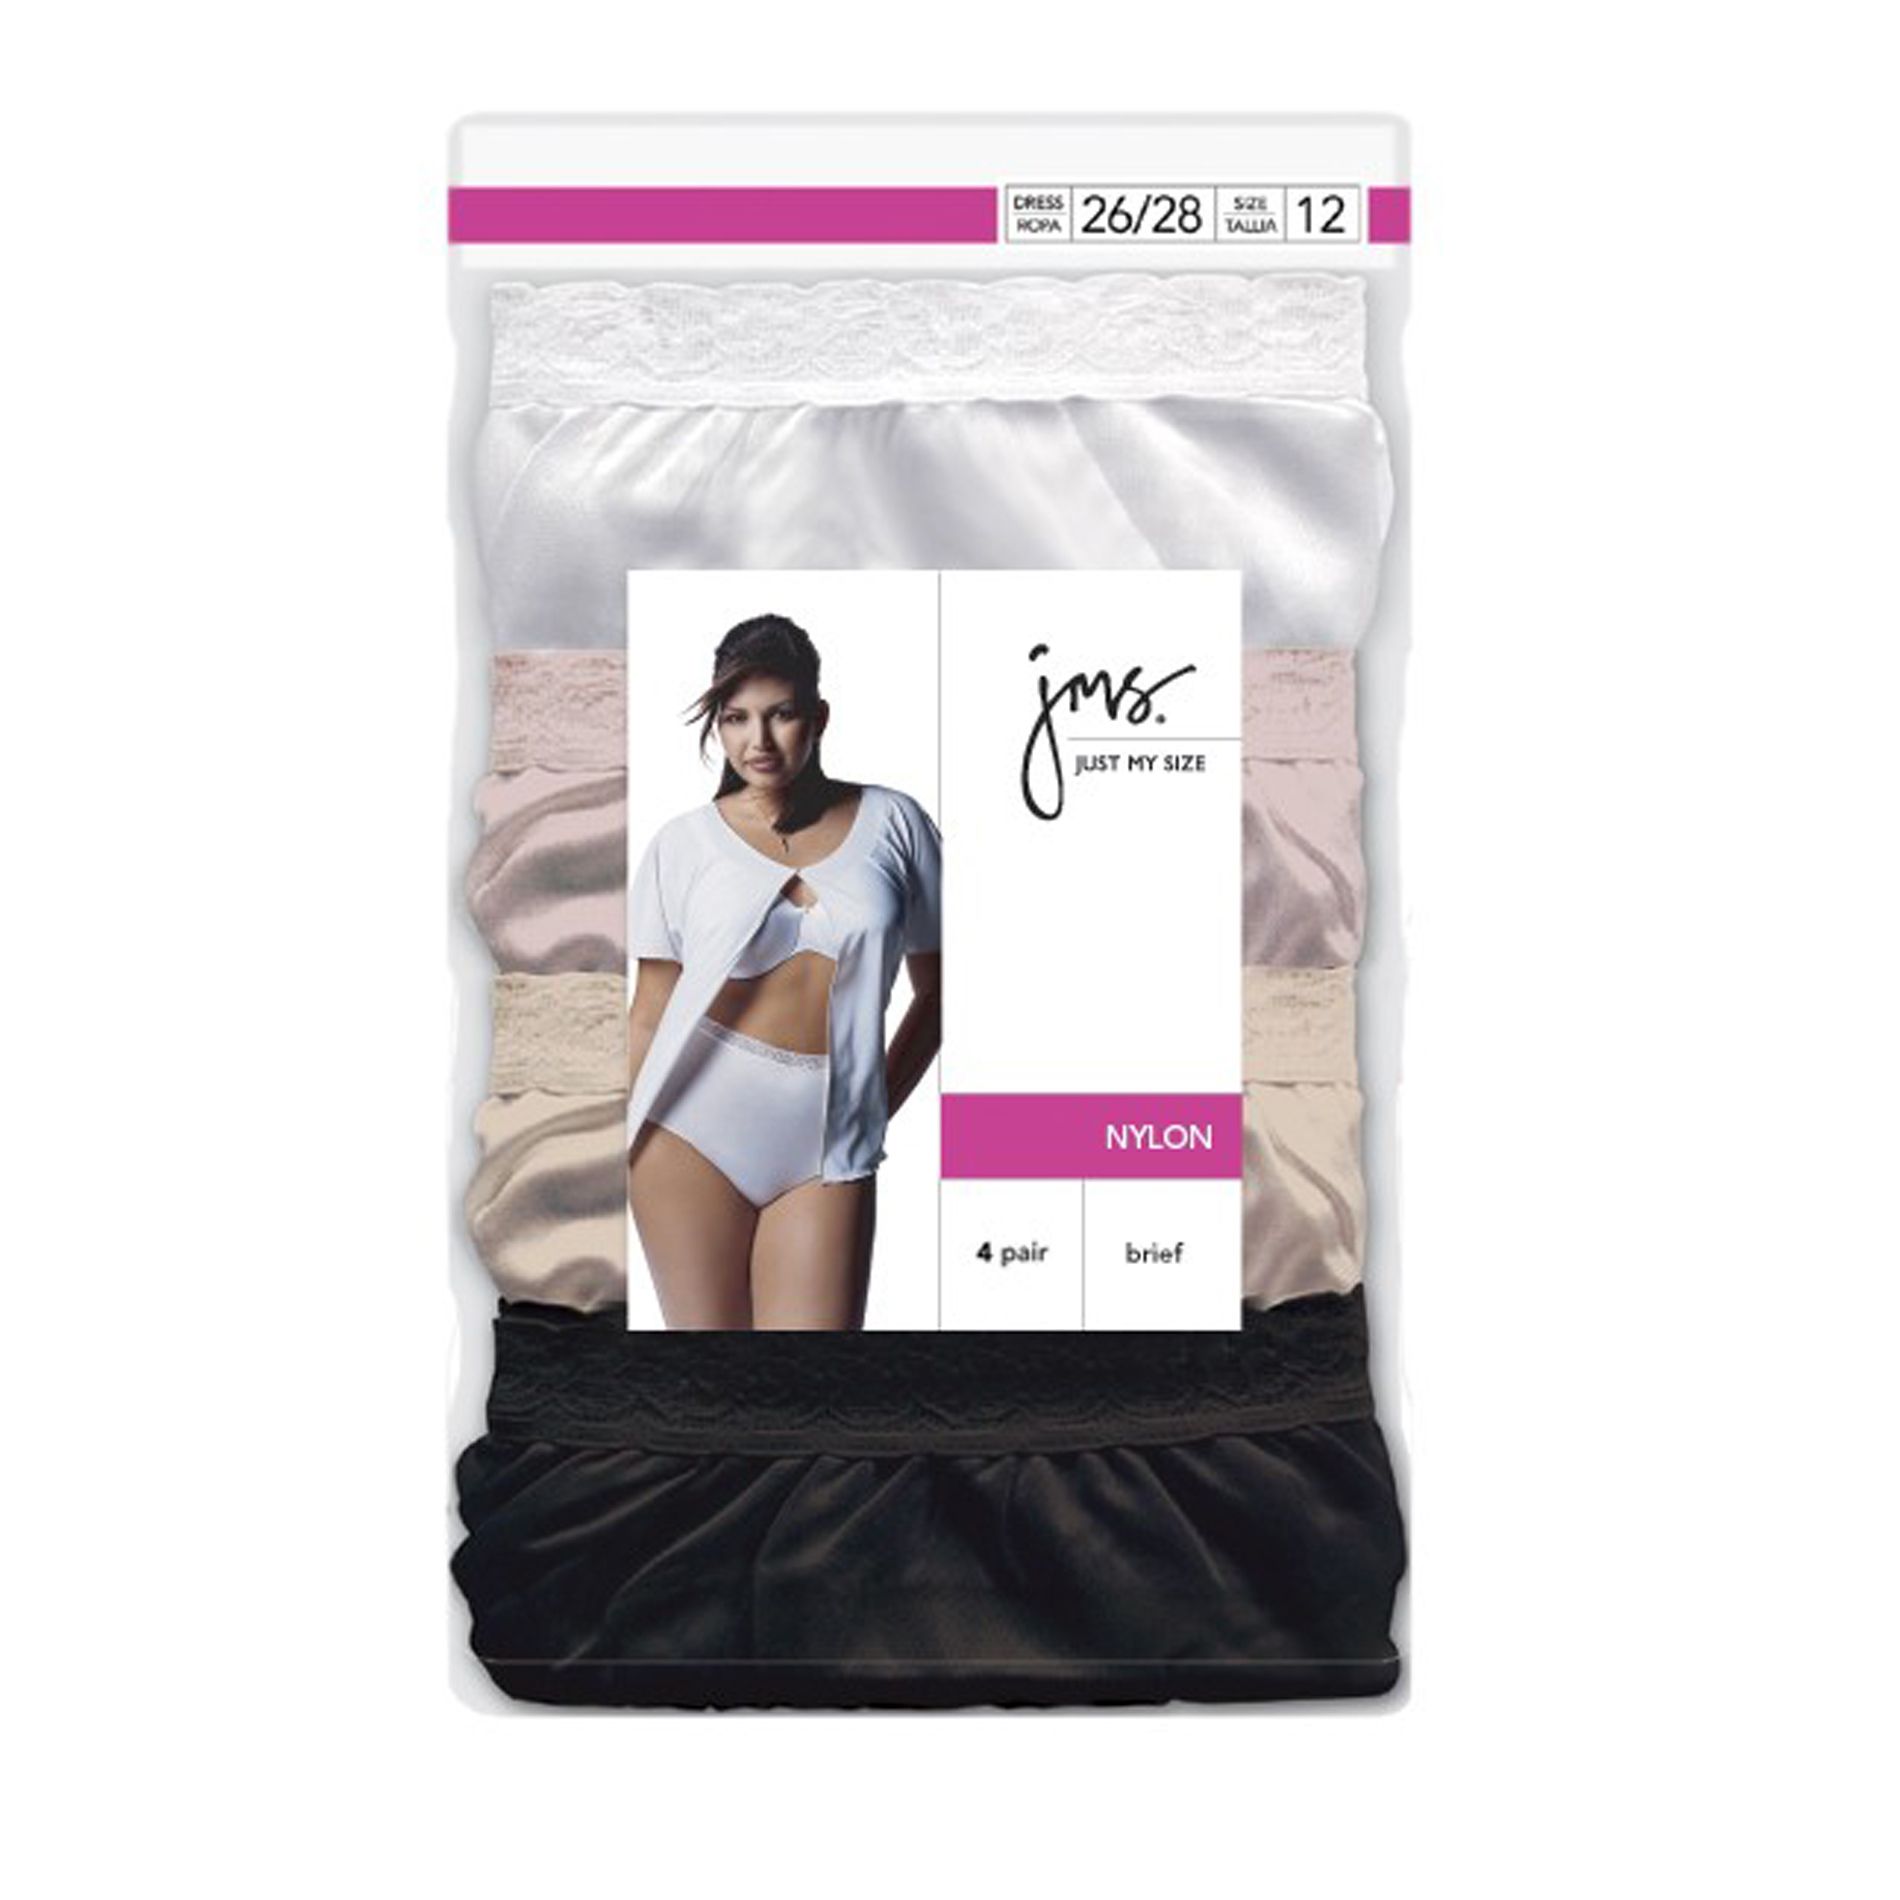 UPC 075338642765 product image for Just My Size Women's4 Pack Nylon Briefs - SARA LEE ACTIVEWEAR | upcitemdb.com